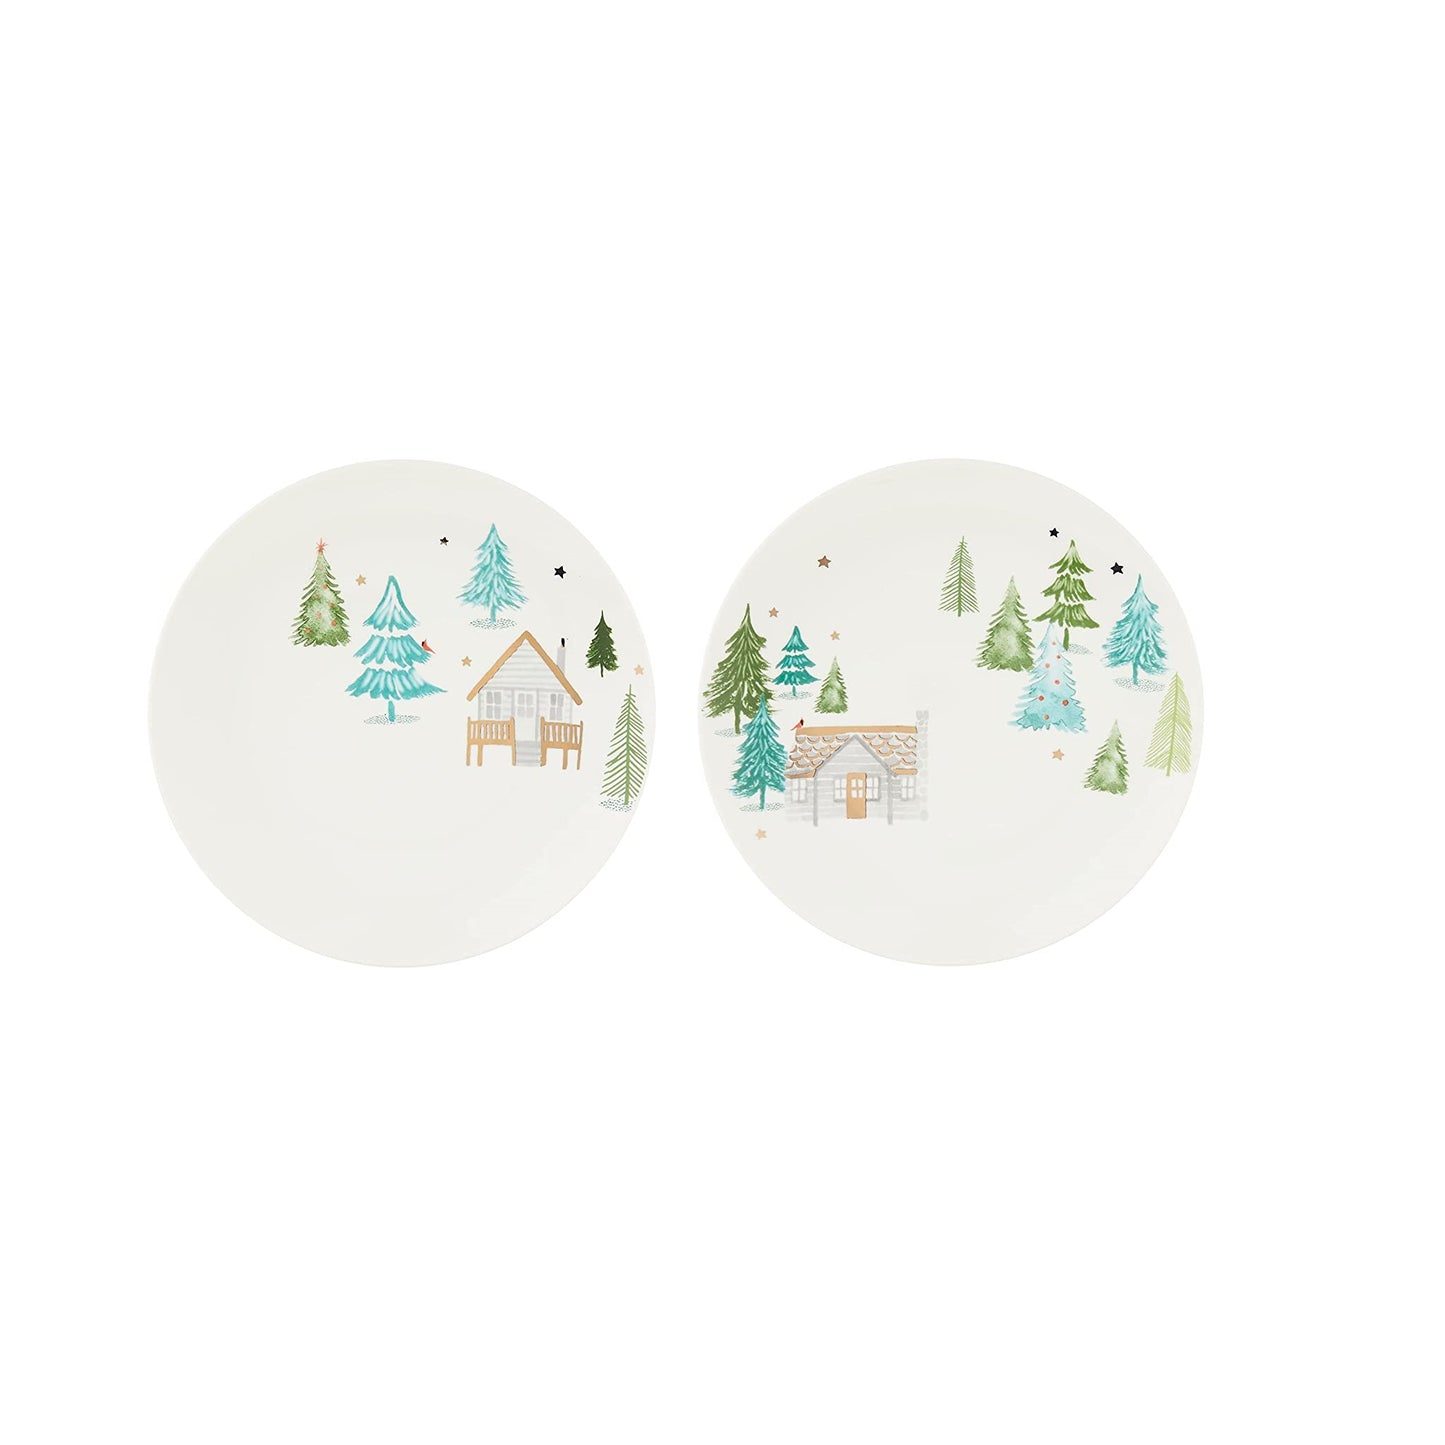 Balsam Lane™ Artistic Cabins 4-piece 8"Accent Plate Set by Lenox